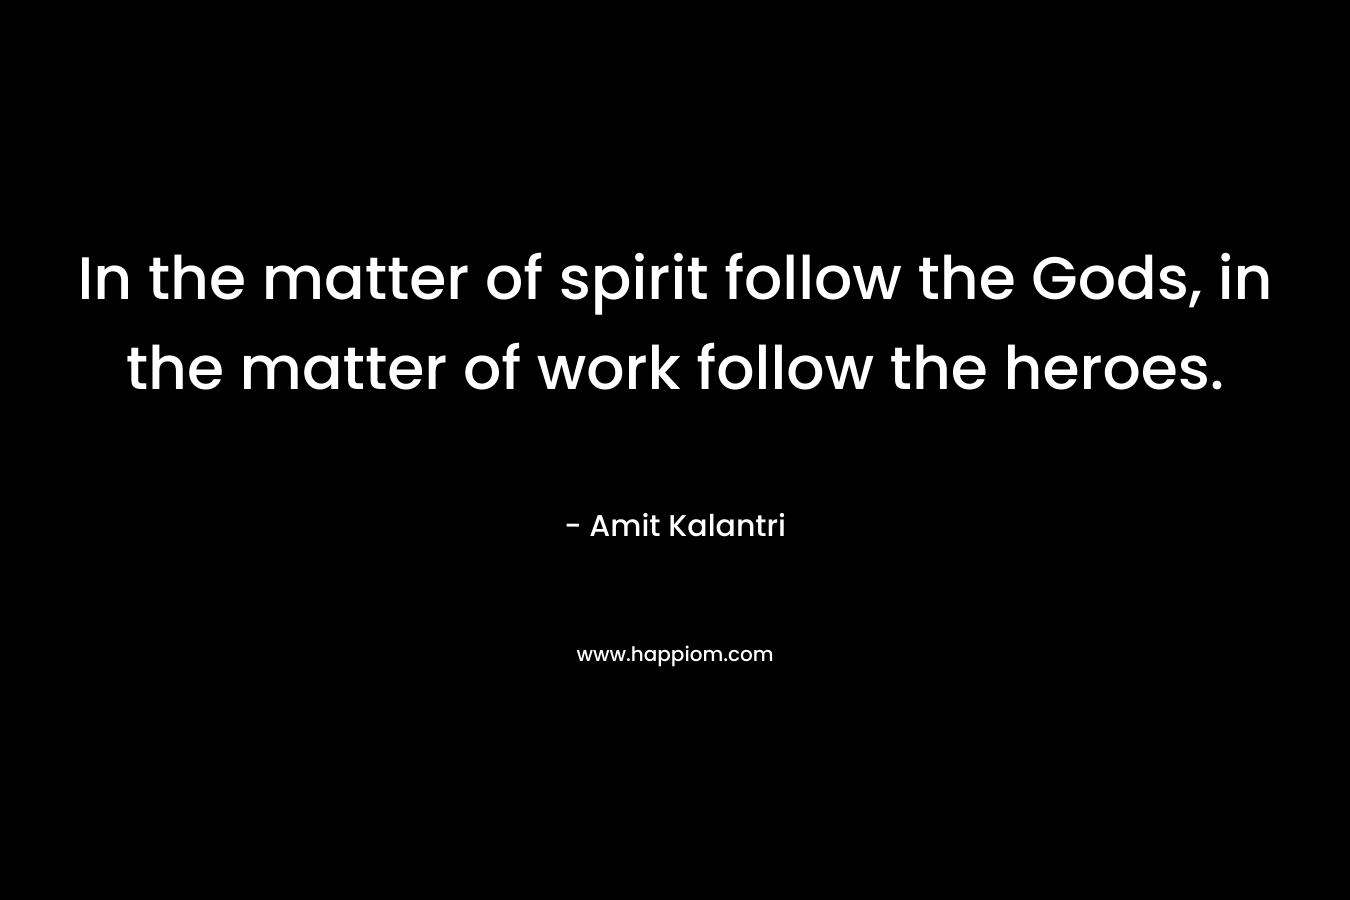 In the matter of spirit follow the Gods, in the matter of work follow the heroes.